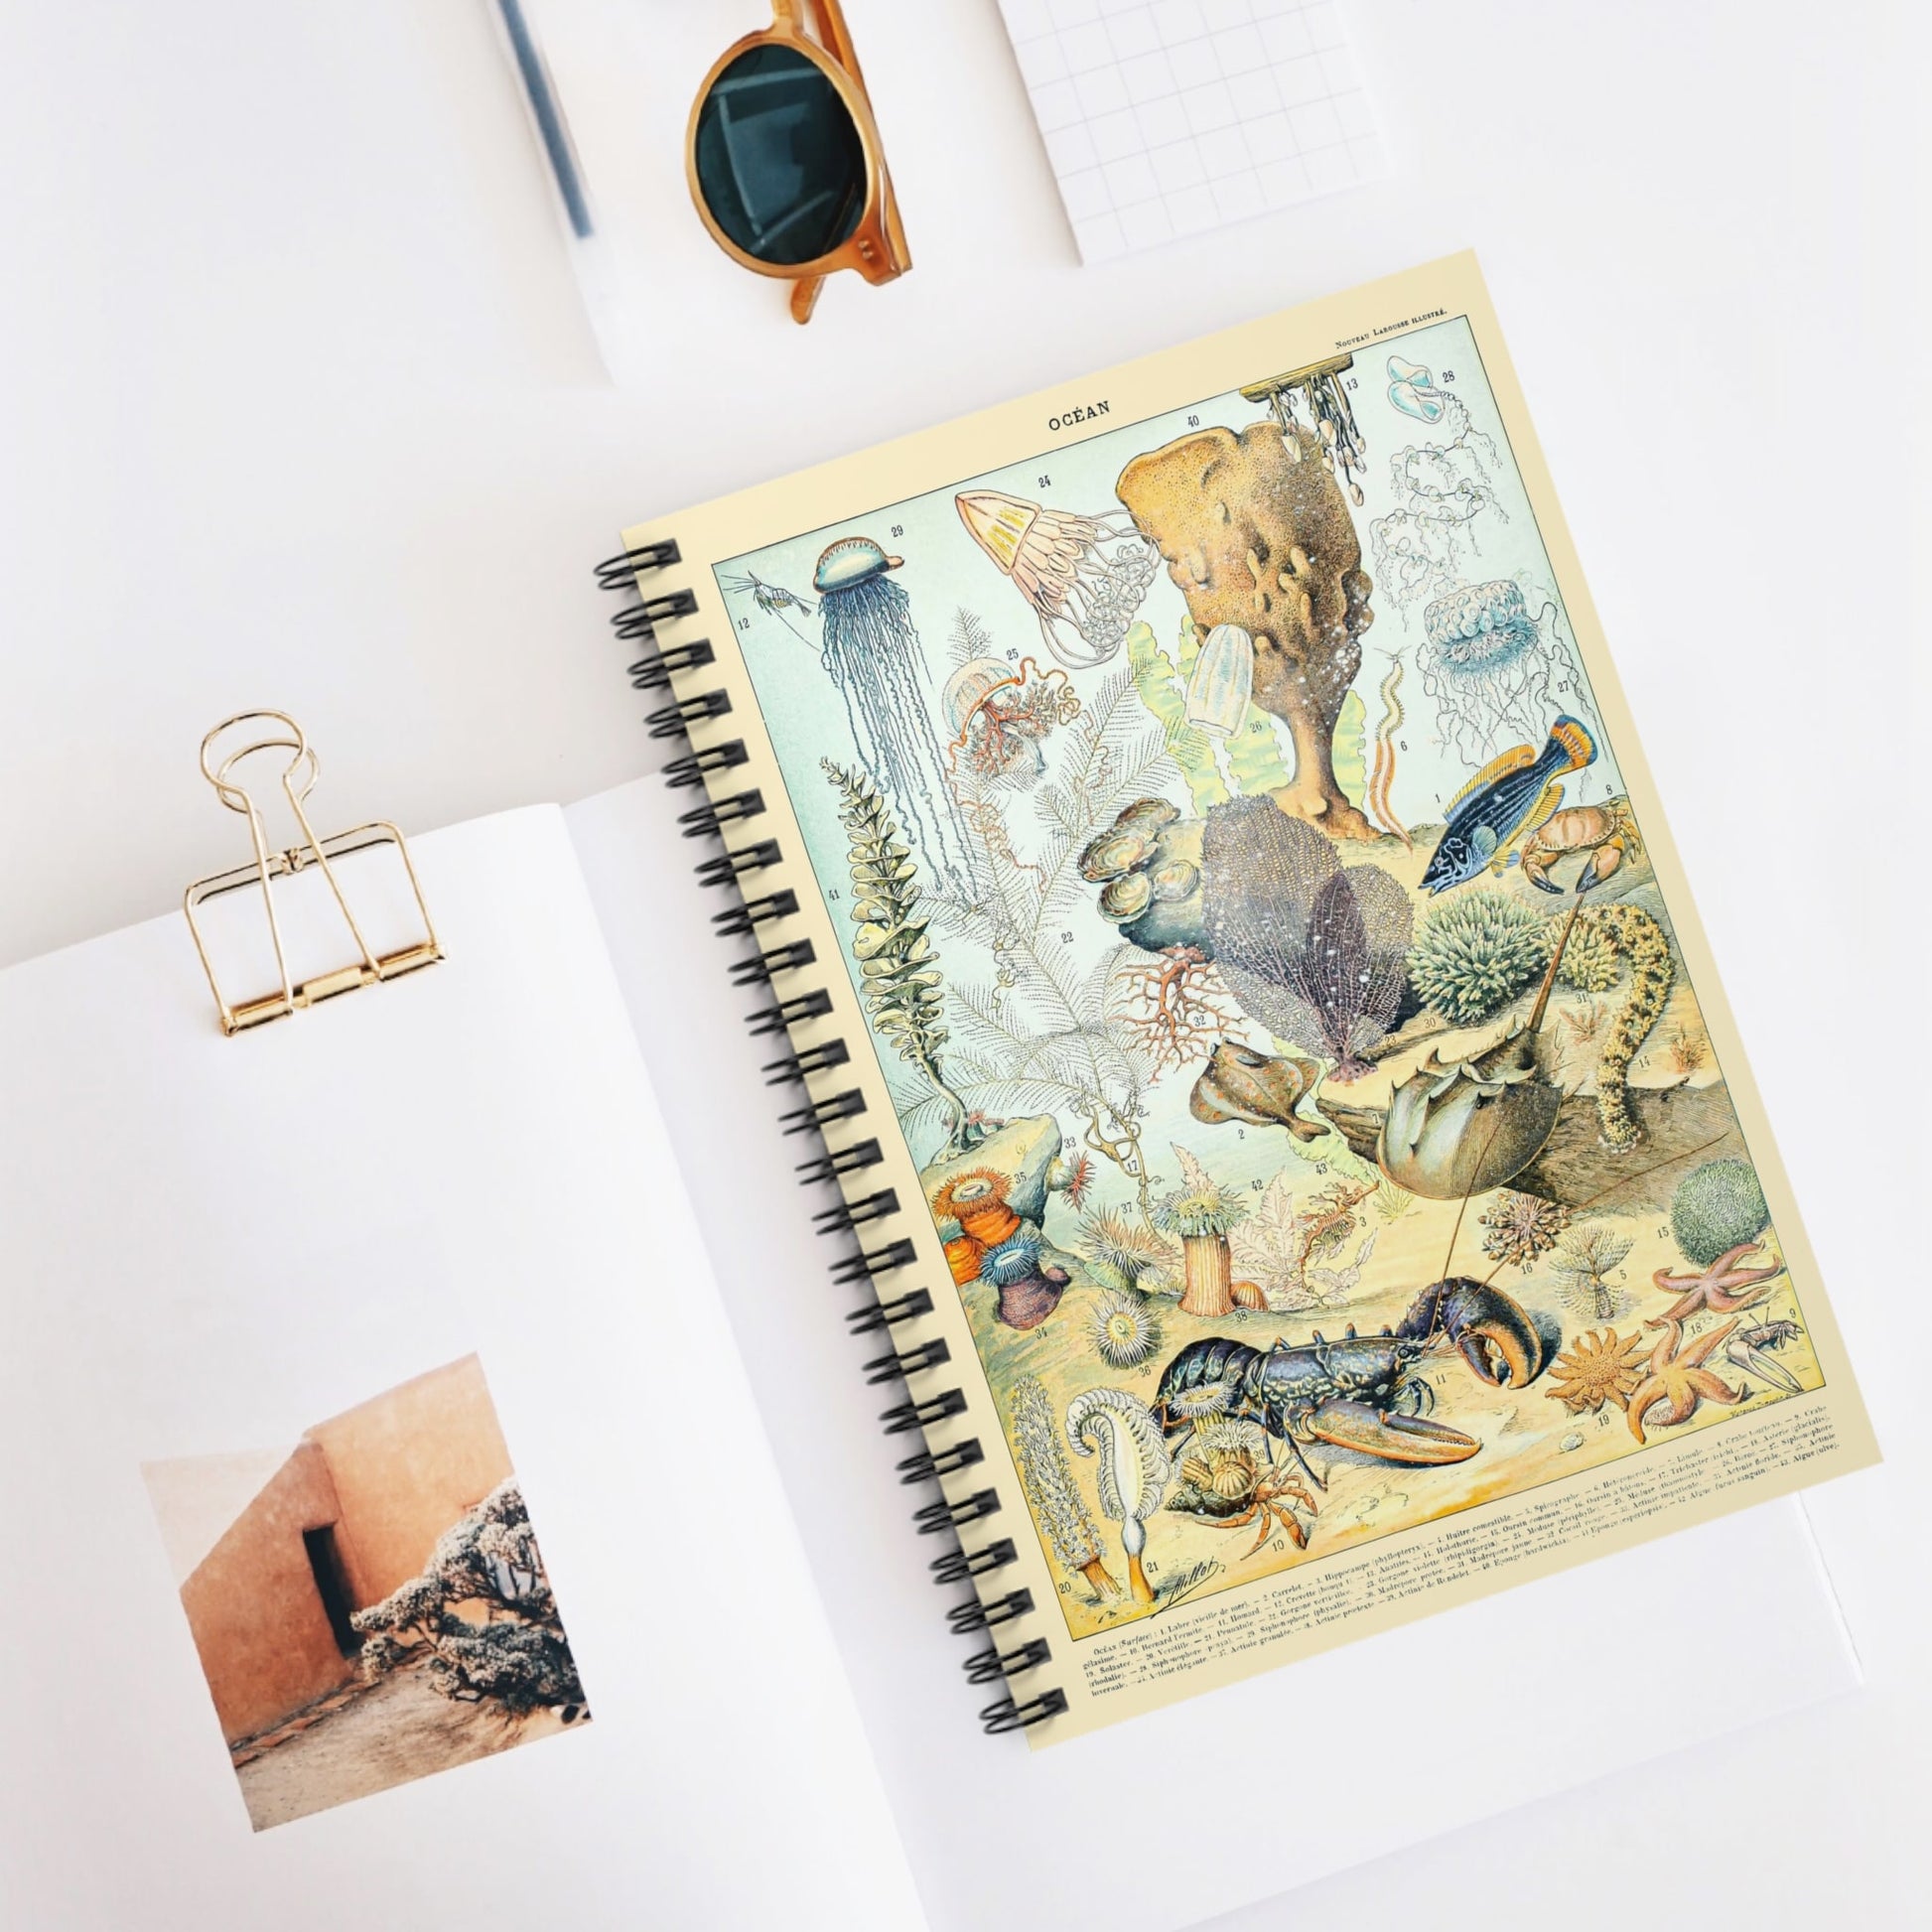 Corals and Jellyfish Spiral Notebook Displayed on Desk